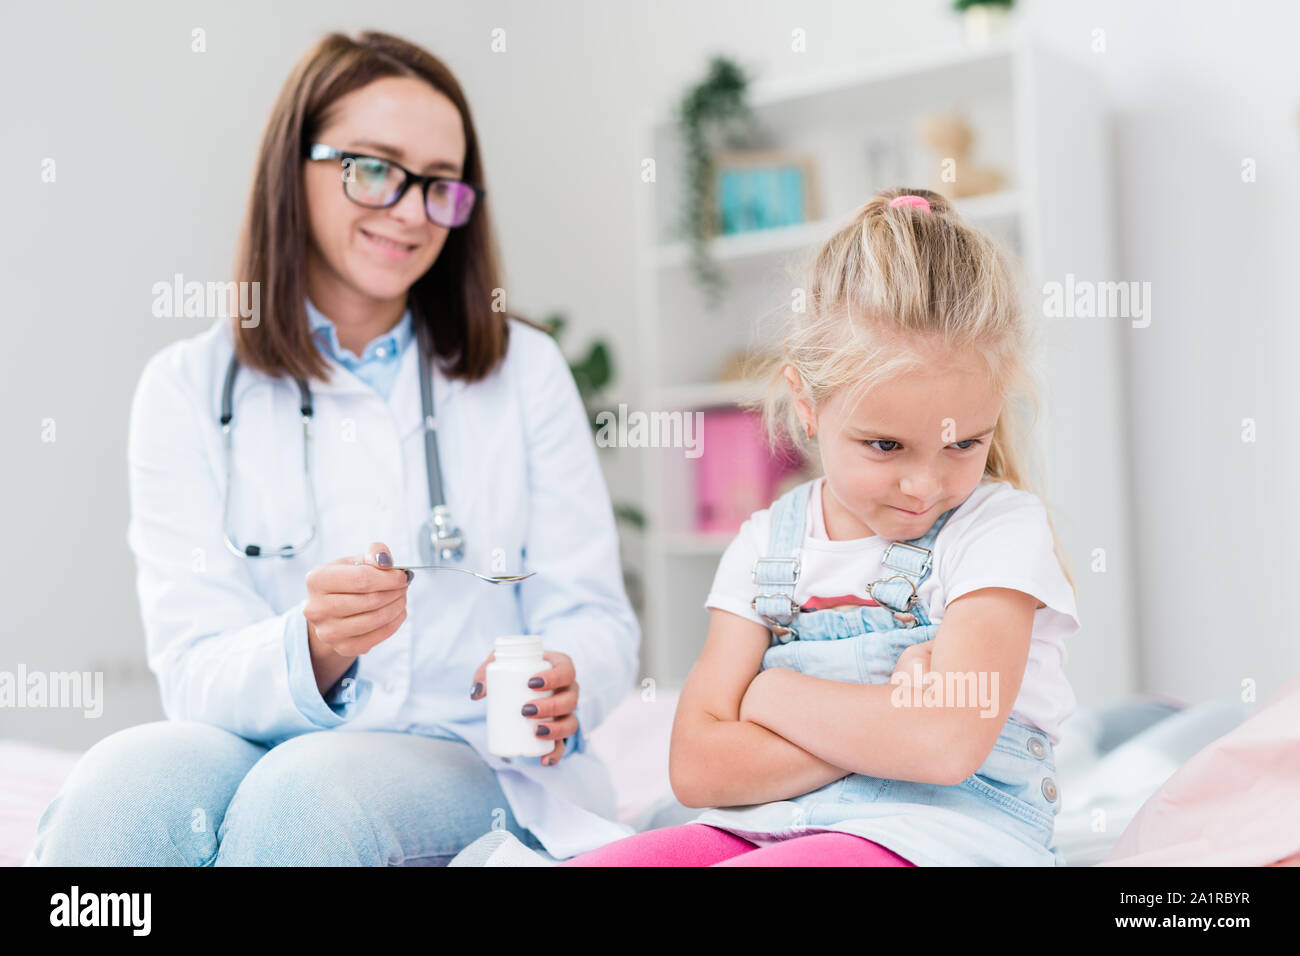 Naughty sick little girl turning away from doctor giving her medicine while both sitting in medical office Stock Photo